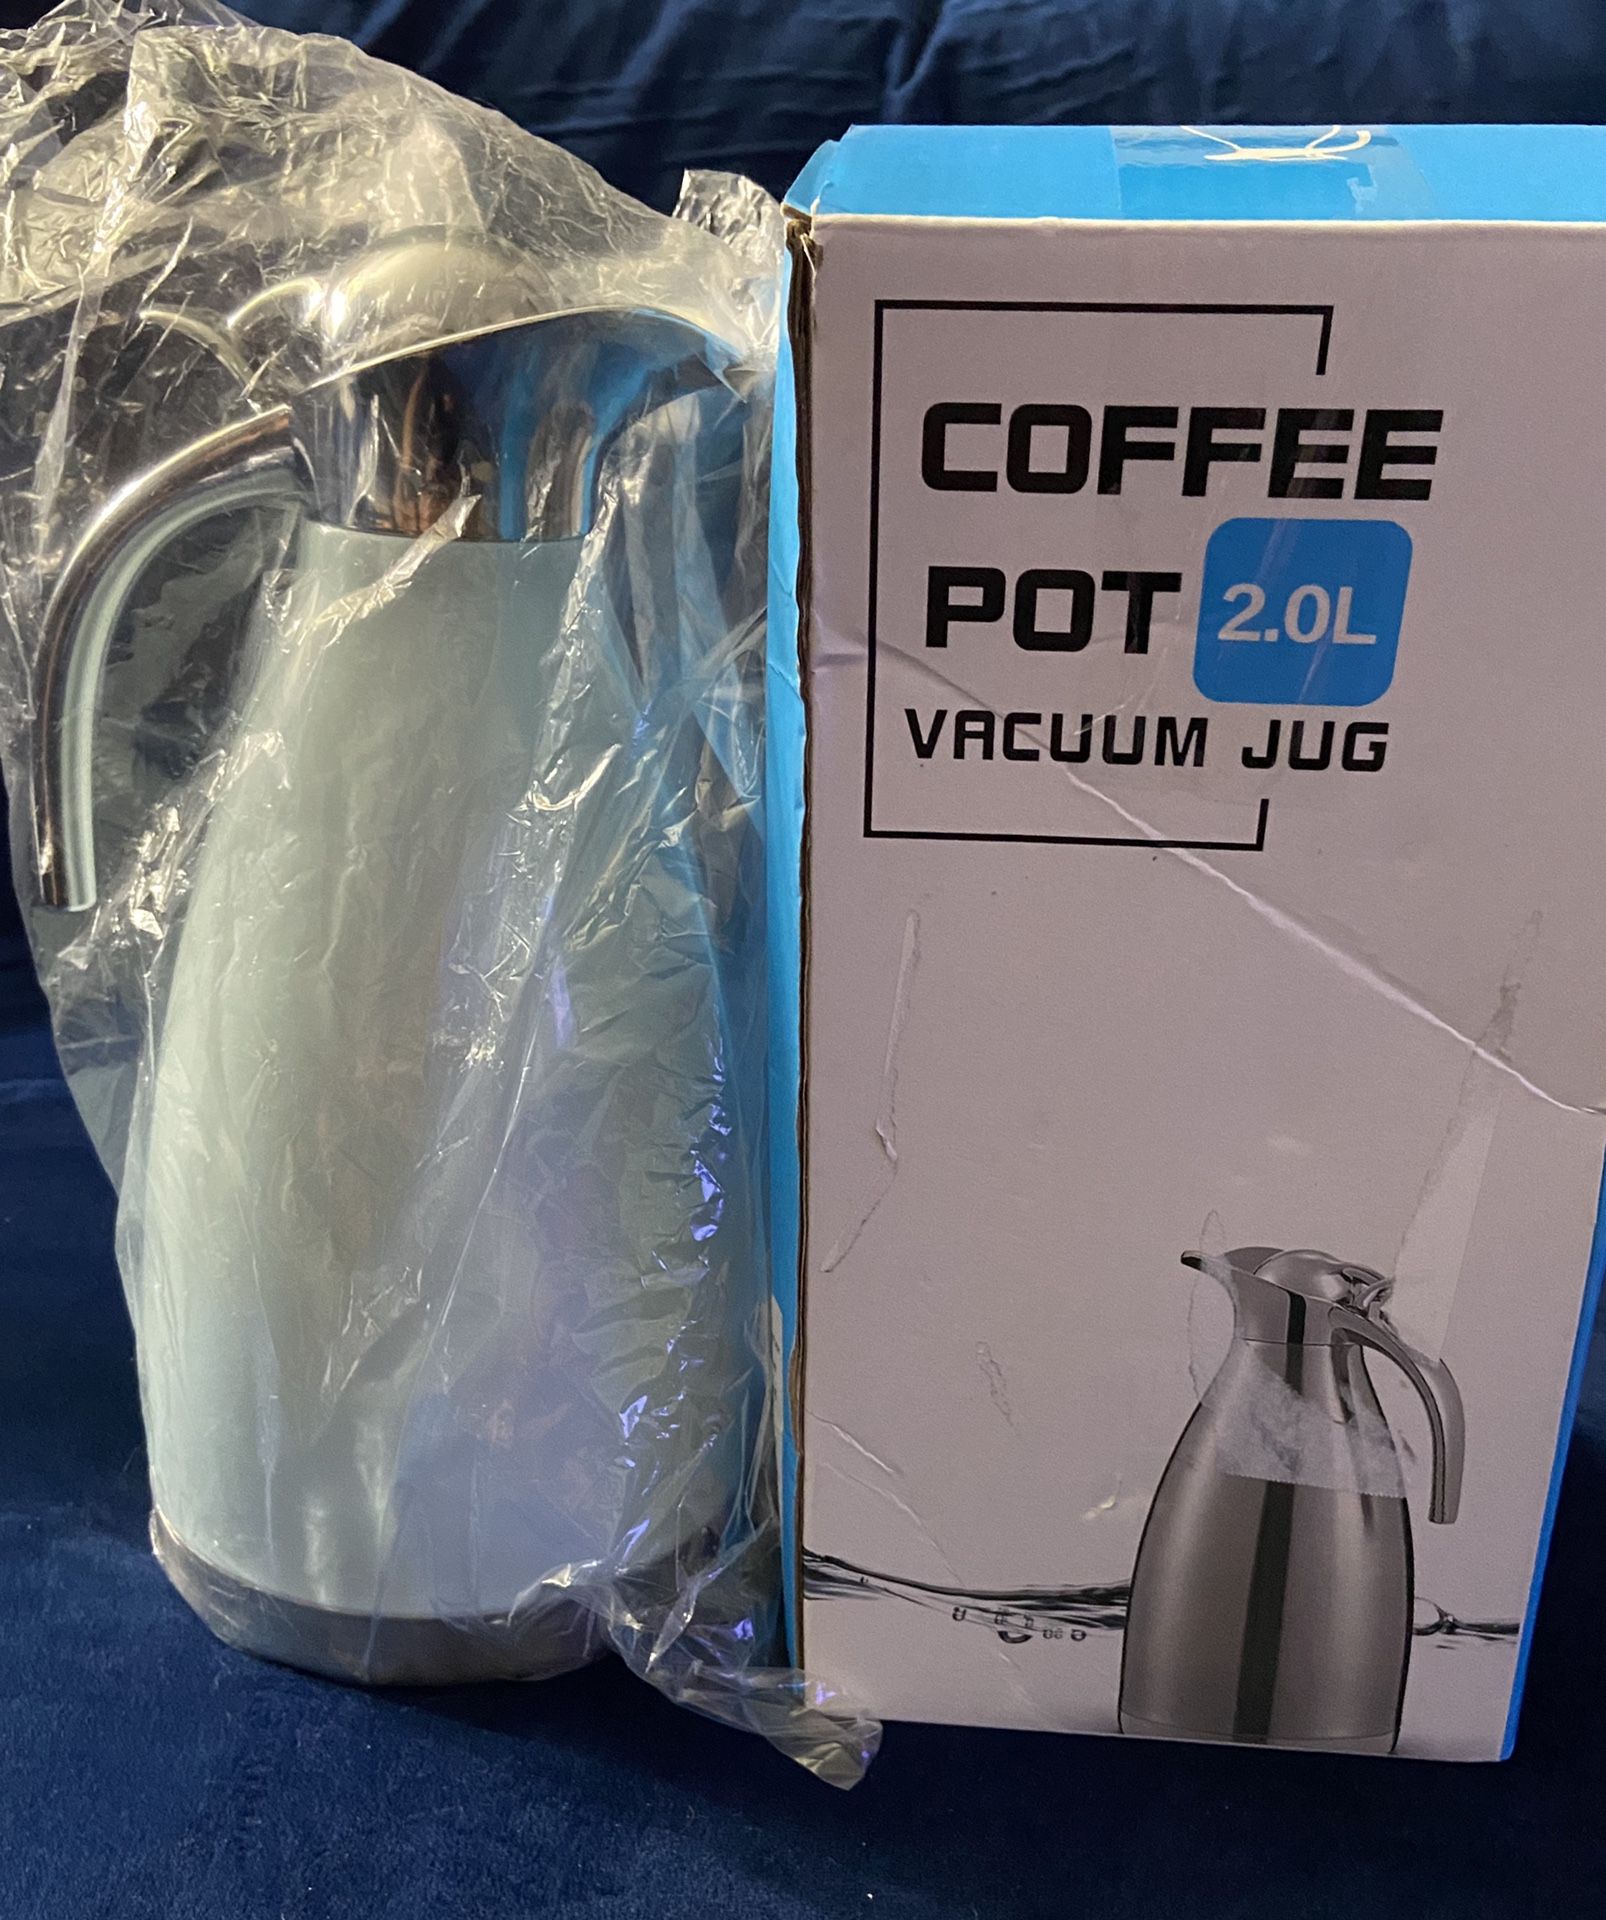 Stainless Steel Coffee Pot 2.0L Vacuum Jug Double Wall Insulation For Hot/Cold